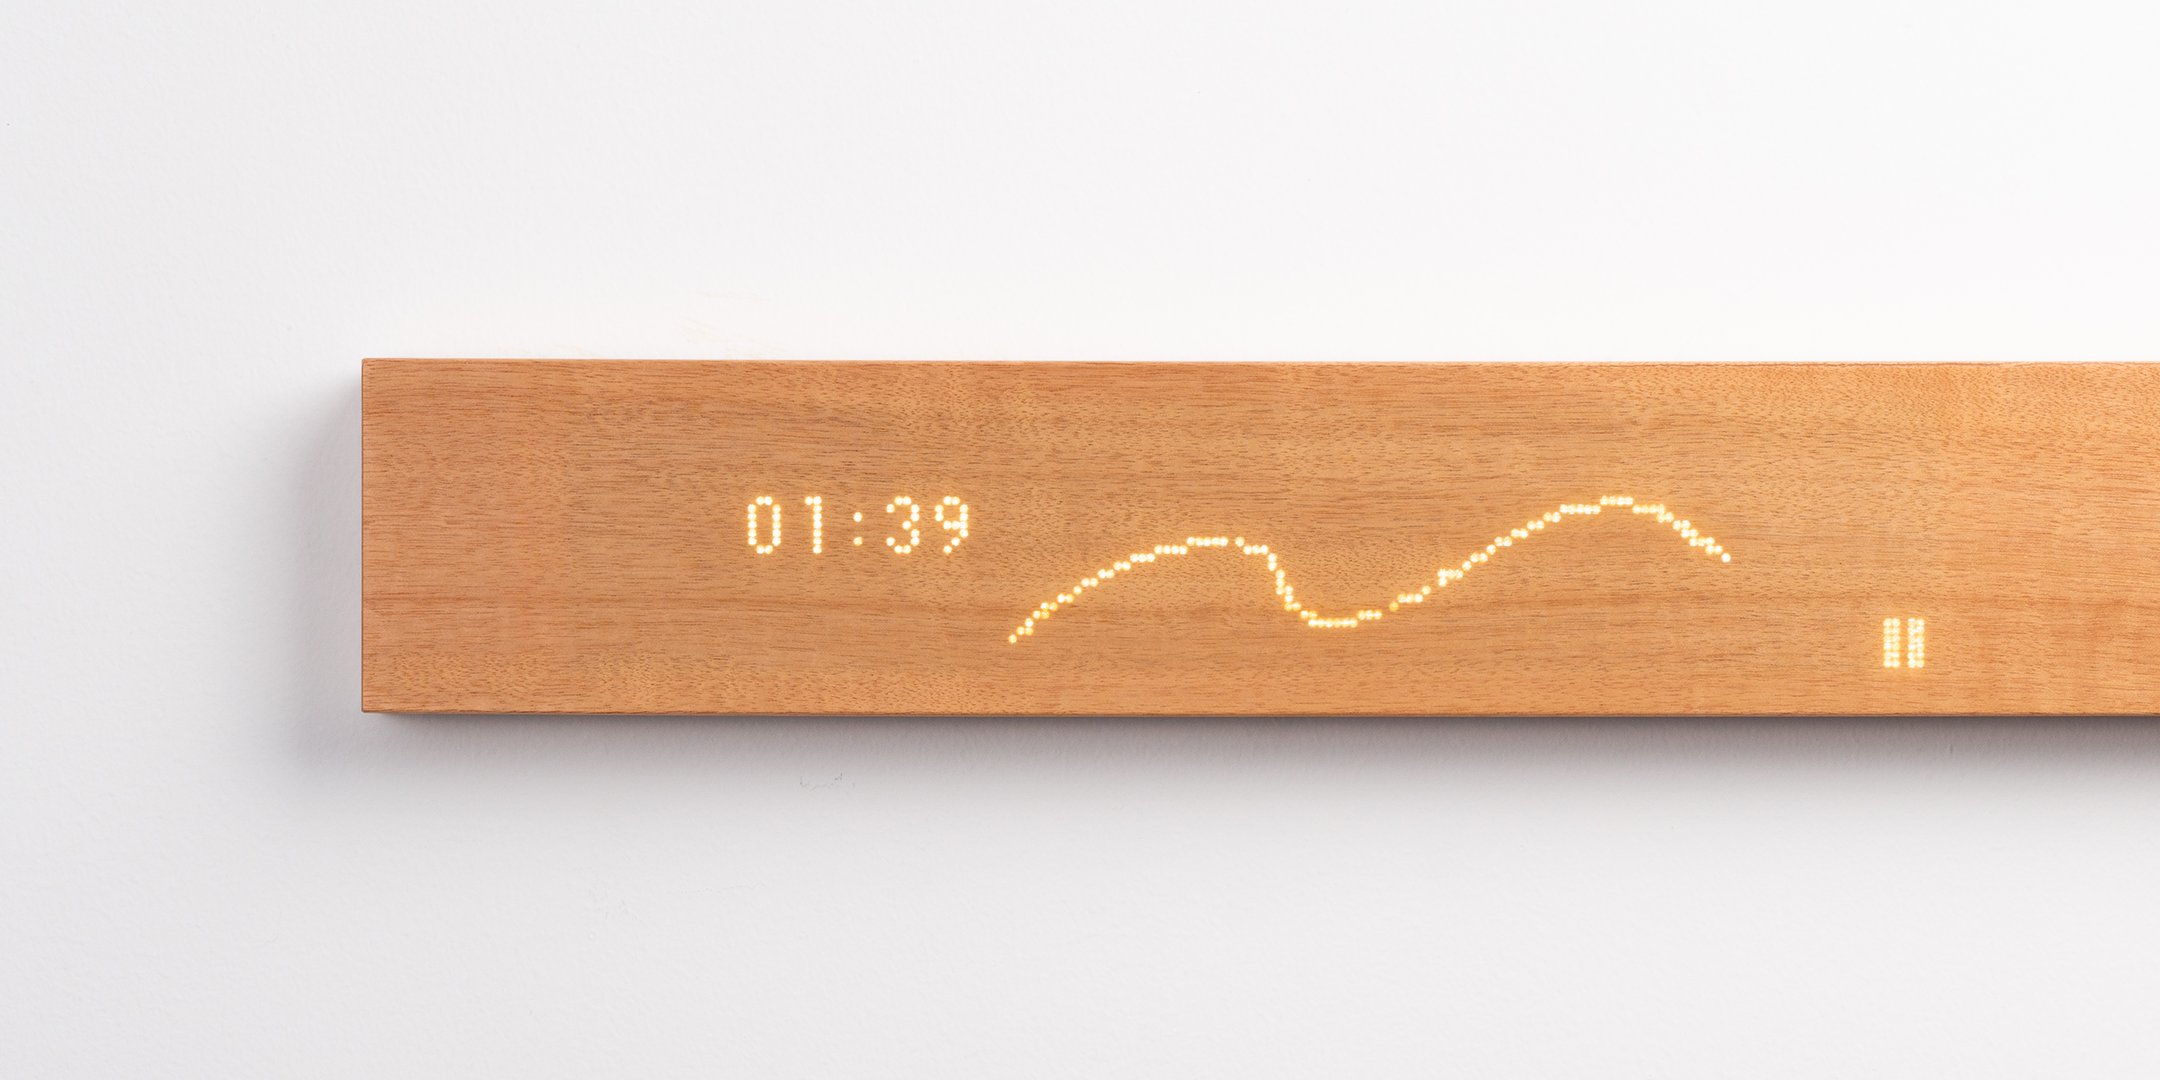 Enabling you to have calmer experience through the wooden warmth of the mui Board working with Alexa